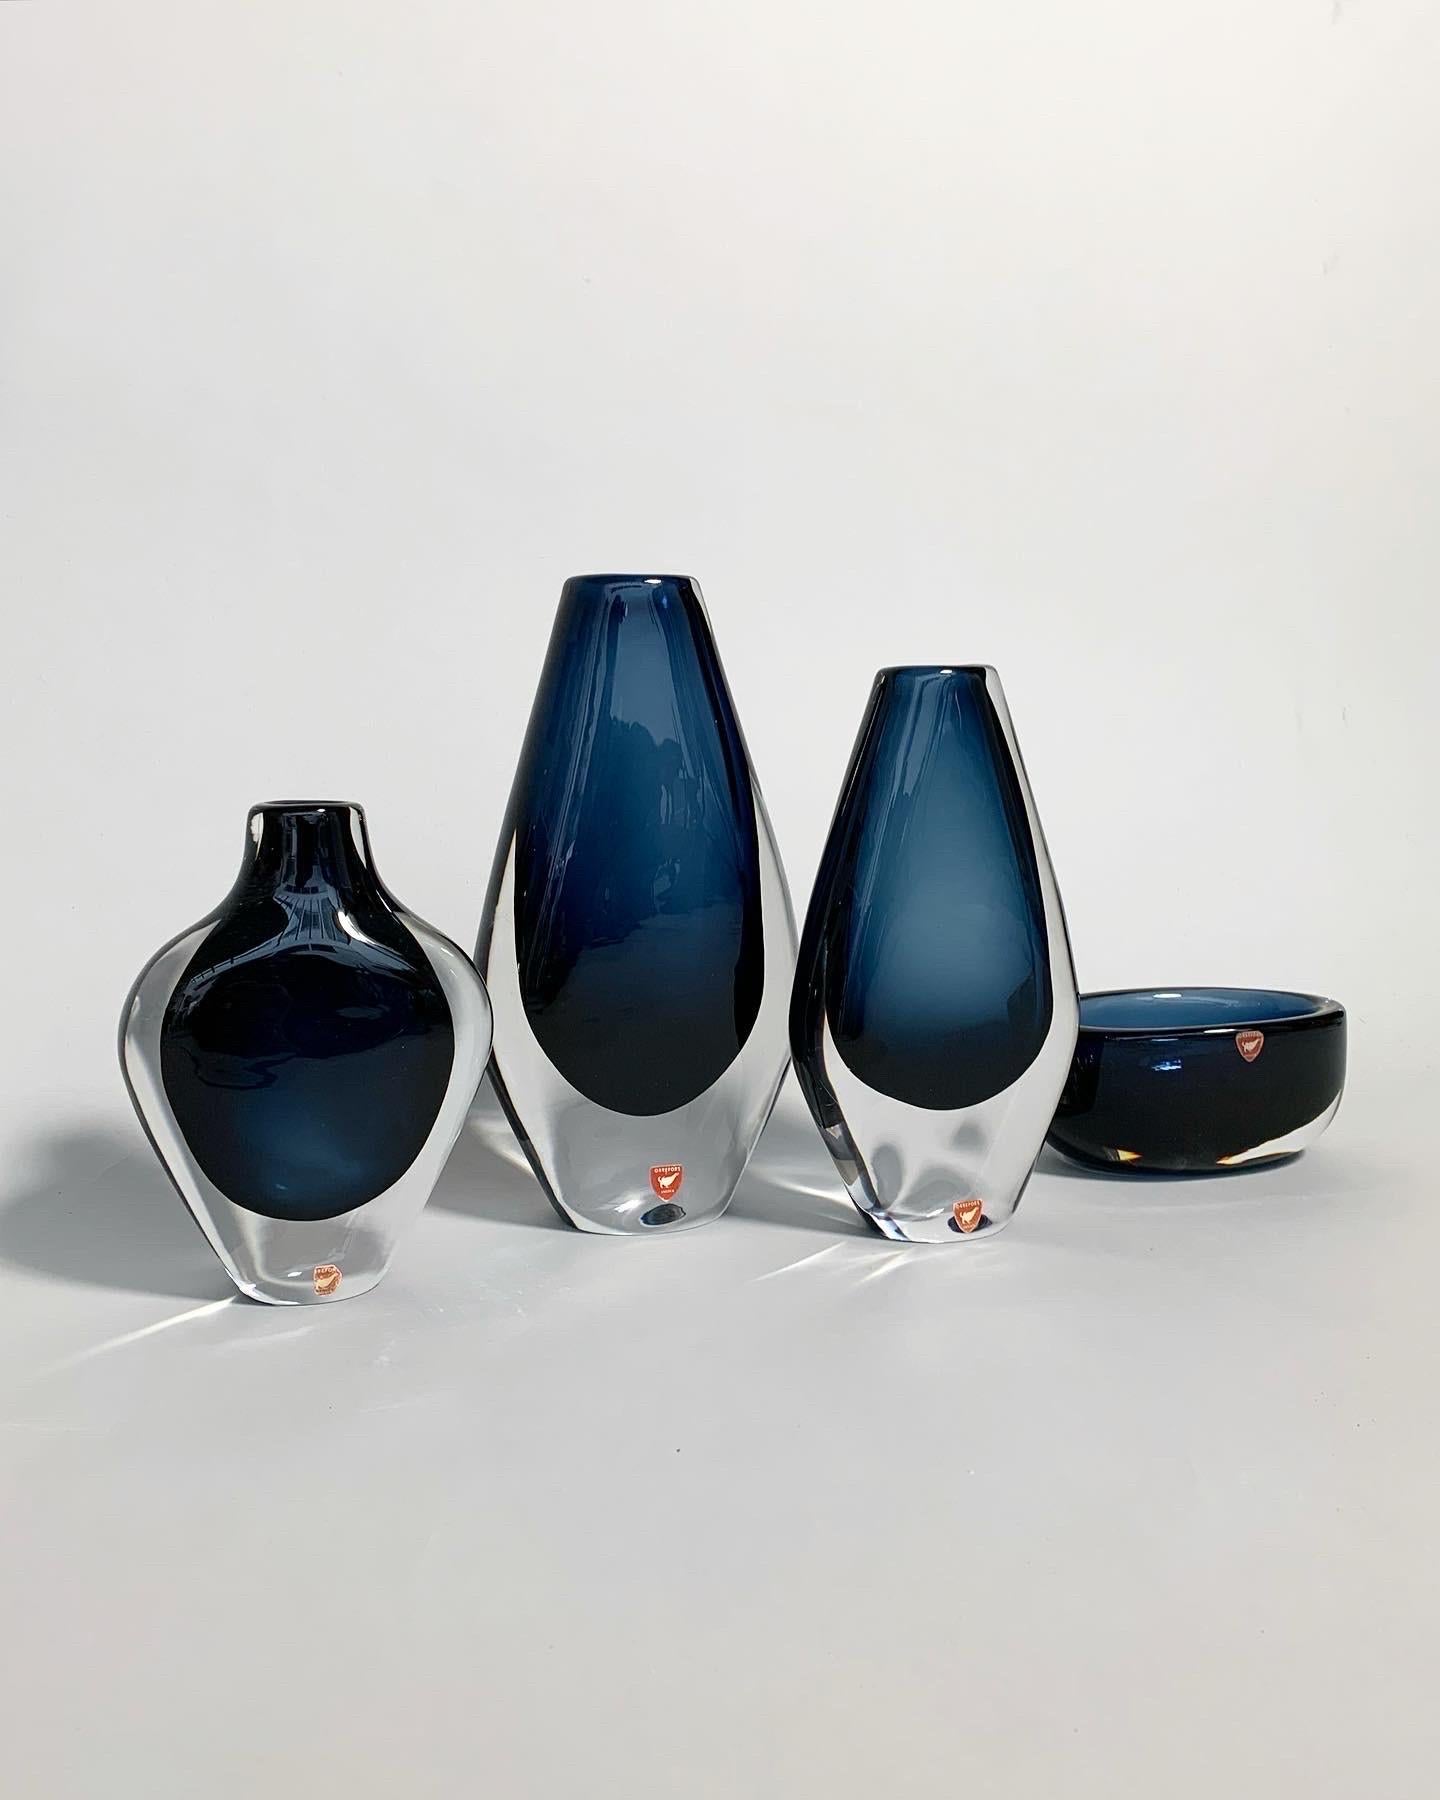 Stunning set of Nils Landberg vases in midnight blue, mouth-blown at Orrefors glassworks in Sweden in the early 1960s. 
Hand-crafted and signed underneath. 

Height: 24.5 cm, 21 cm, 16.5 cm, 6 cm
Width: 12 cm, 11 cm, 12 cm, 14 cm
Depth: 5.5 cm,